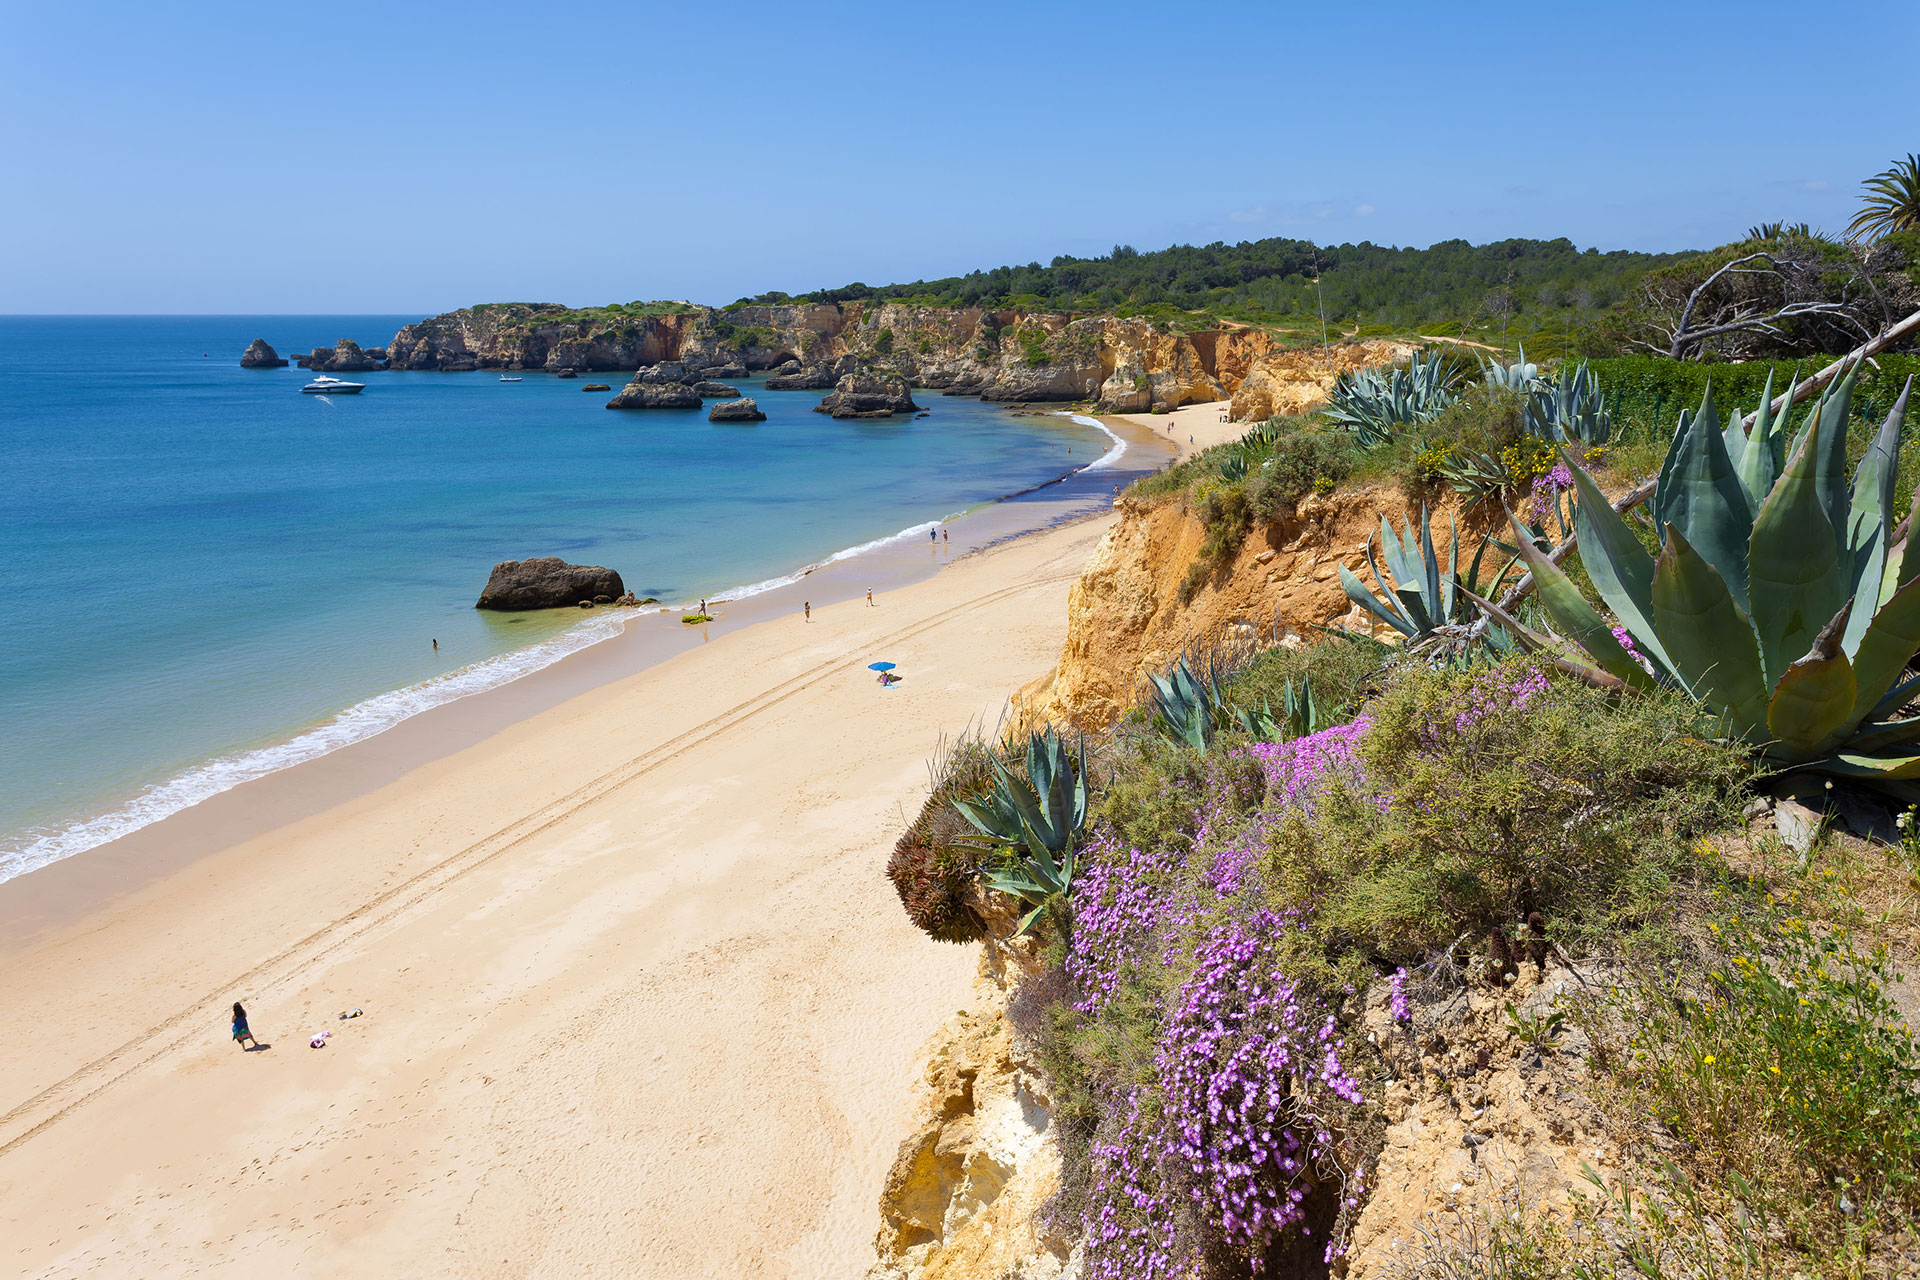 Algarve was the fastest growing region in the country due to tourism